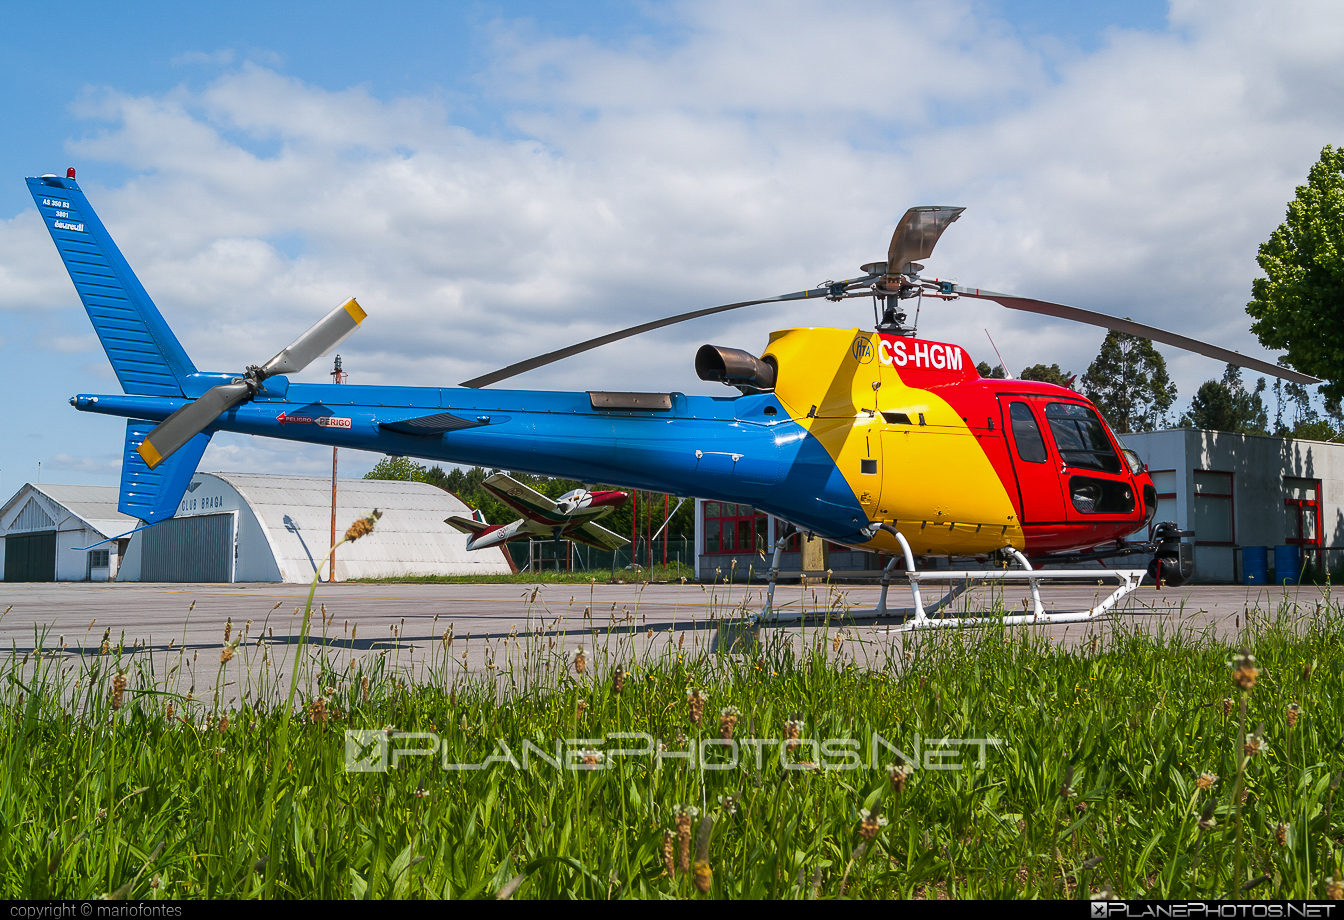 Eurocopter AS350 B3 Ecureuil - CS-HGM operated by HTA Helicópteros #as350 #as350b3 #as350b3ecureuil #as350ecureuil #eurocopter #htahelicopteros